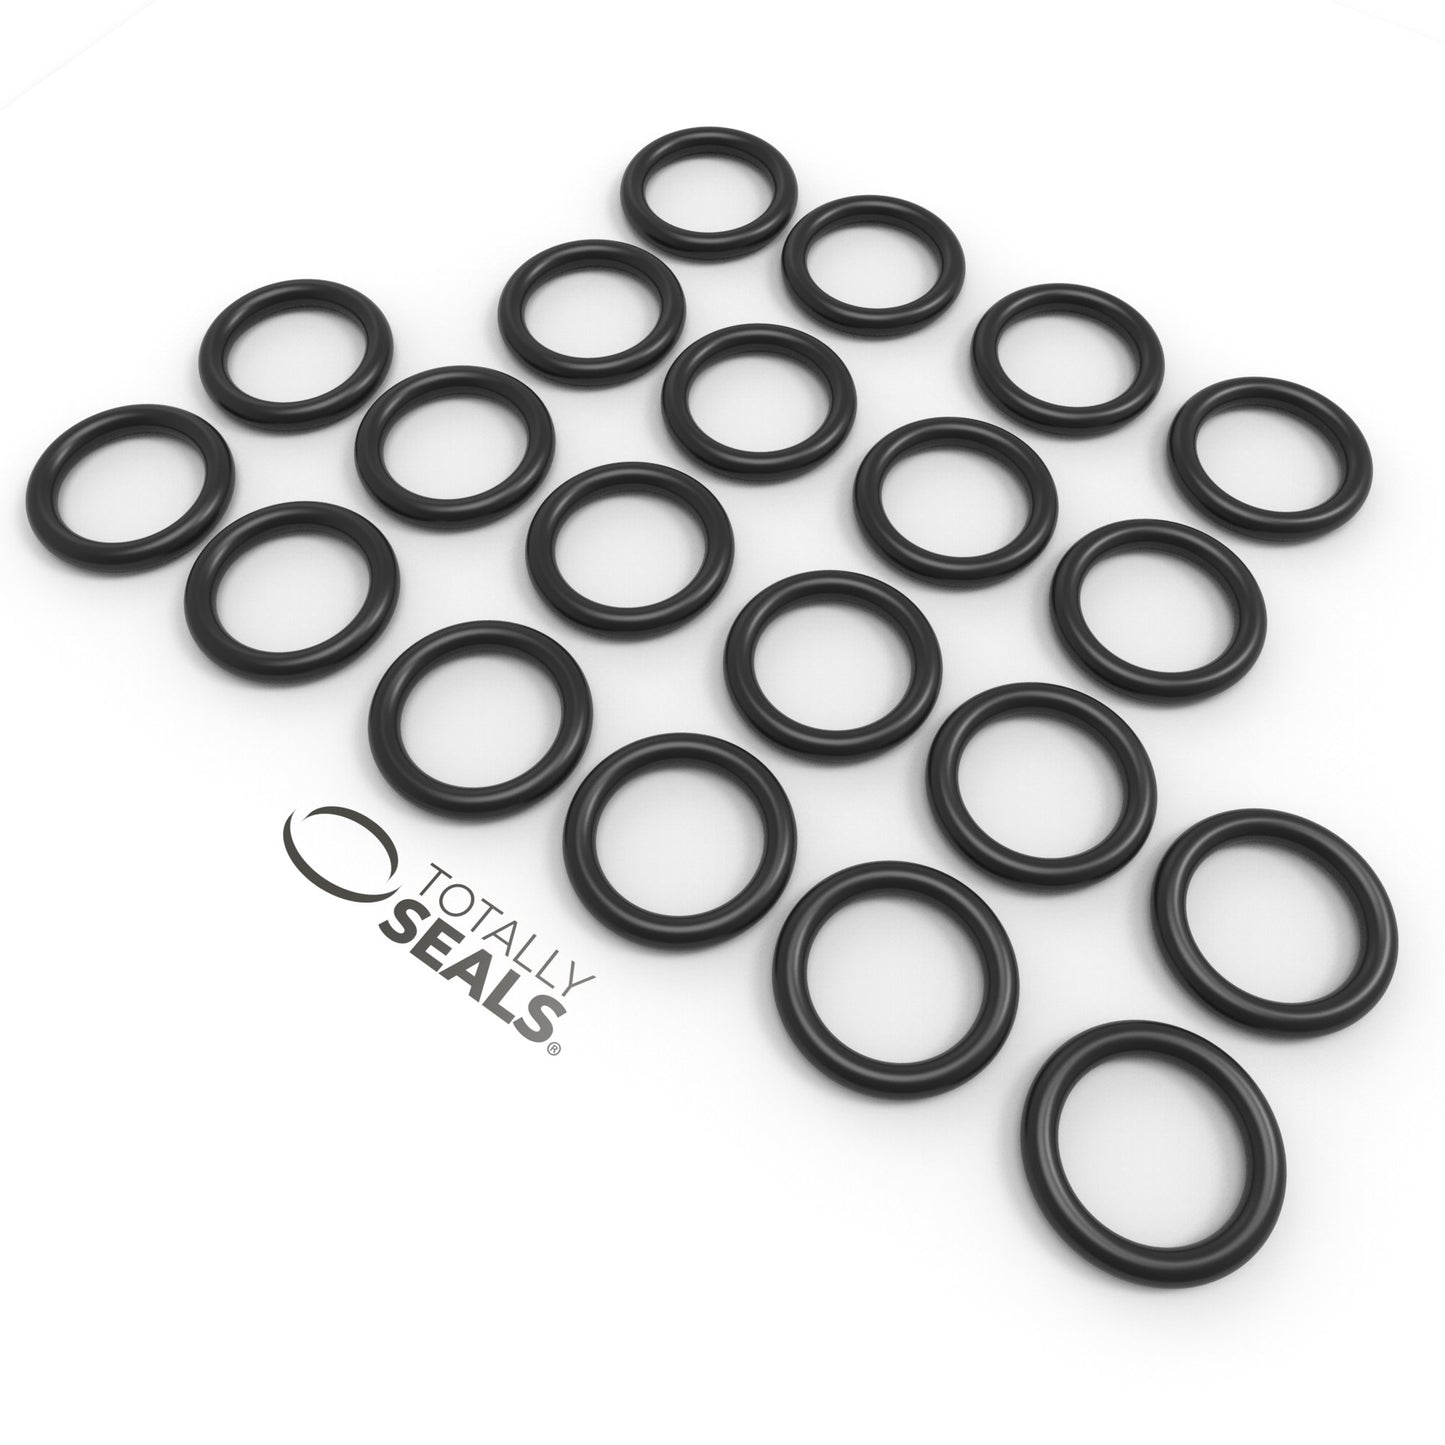 39mm x 3mm (45mm OD) Nitrile O-Rings - Totally Seals®